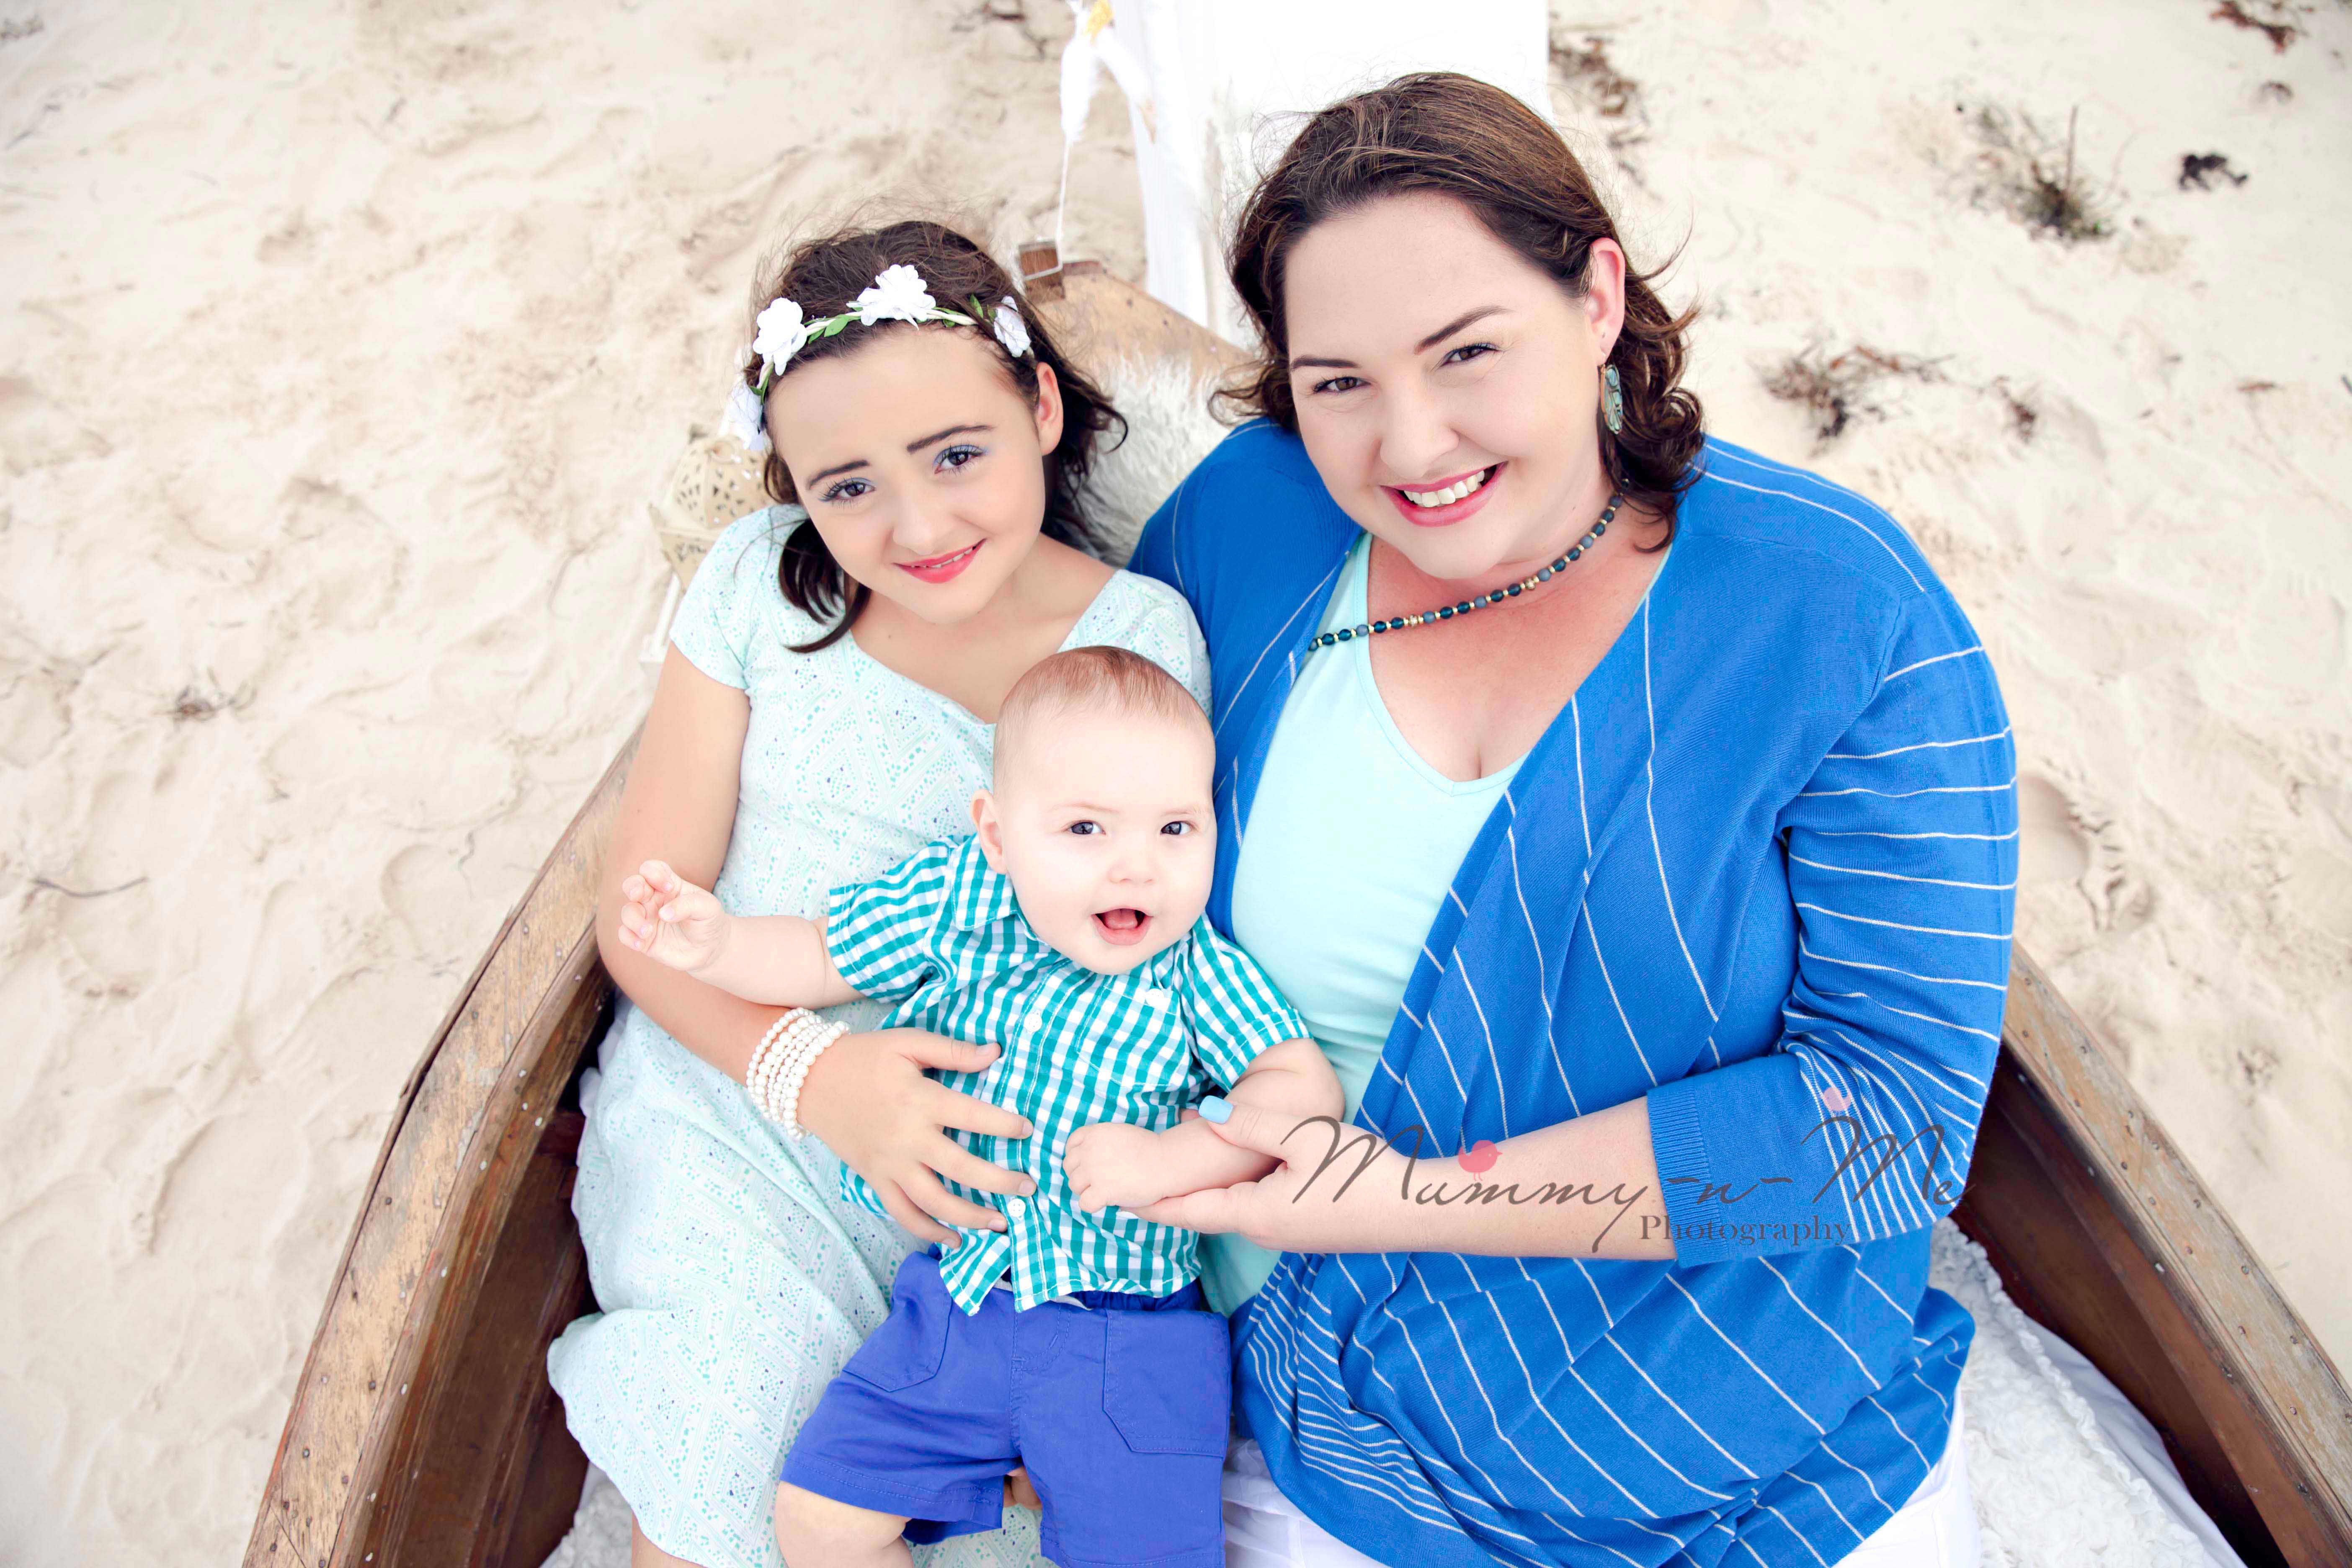 white and gold themed family session at the beach with a boat Brisbane Family Child Baby Themed Photographer